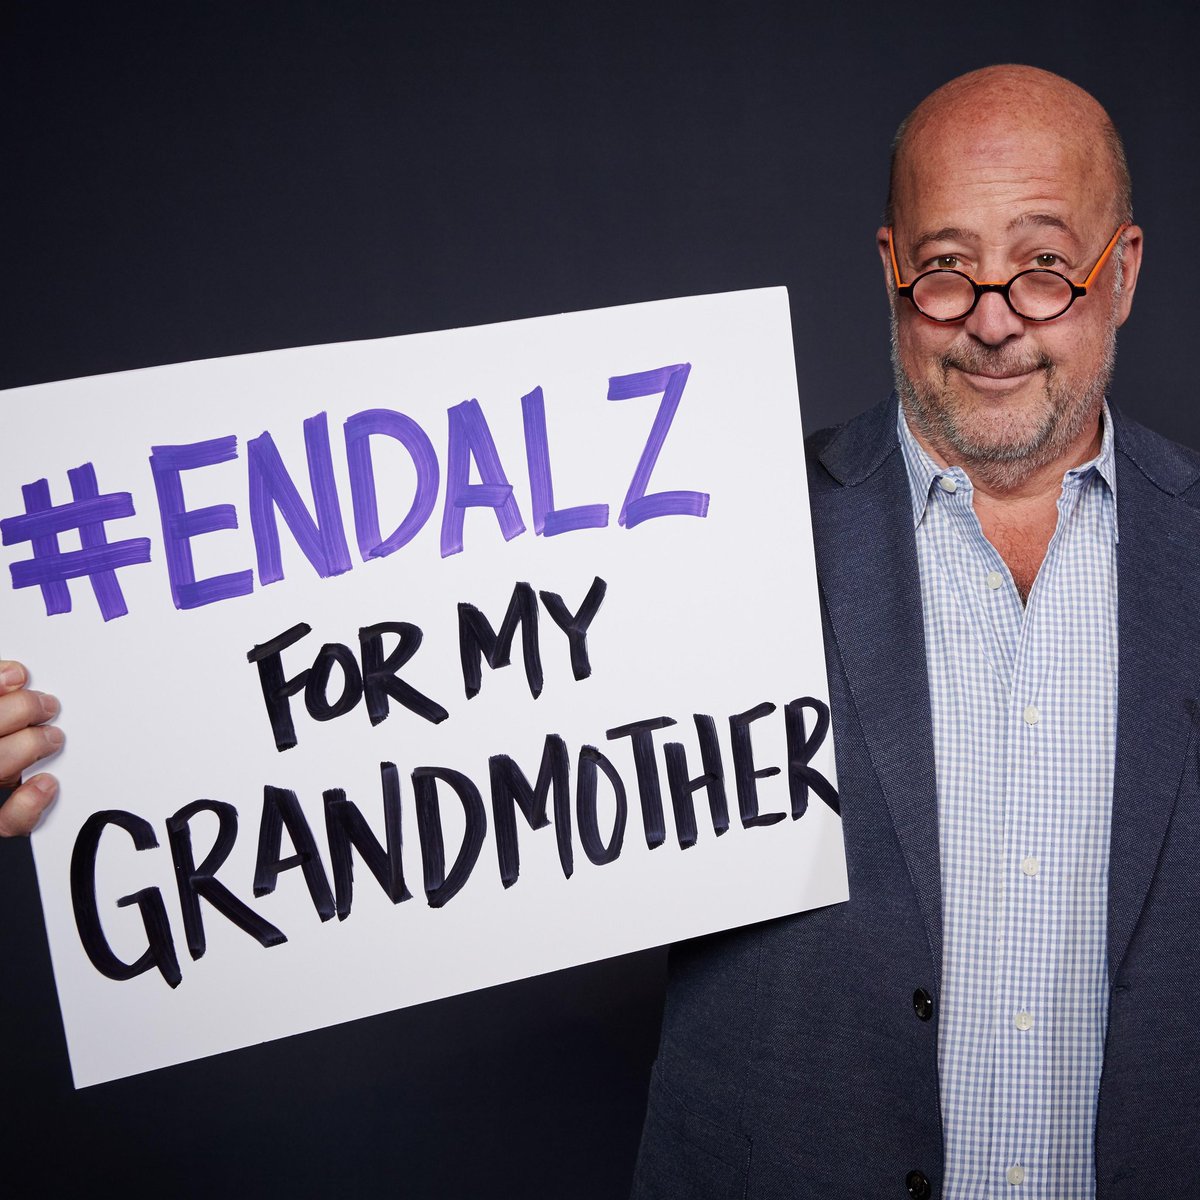 Happy birthday to #ENDALZ Celebrity Champion, chef @andrewzimmern! Andrew, thank you for continuing to raise Alzheimer's awareness in honor of your grandmother.💜